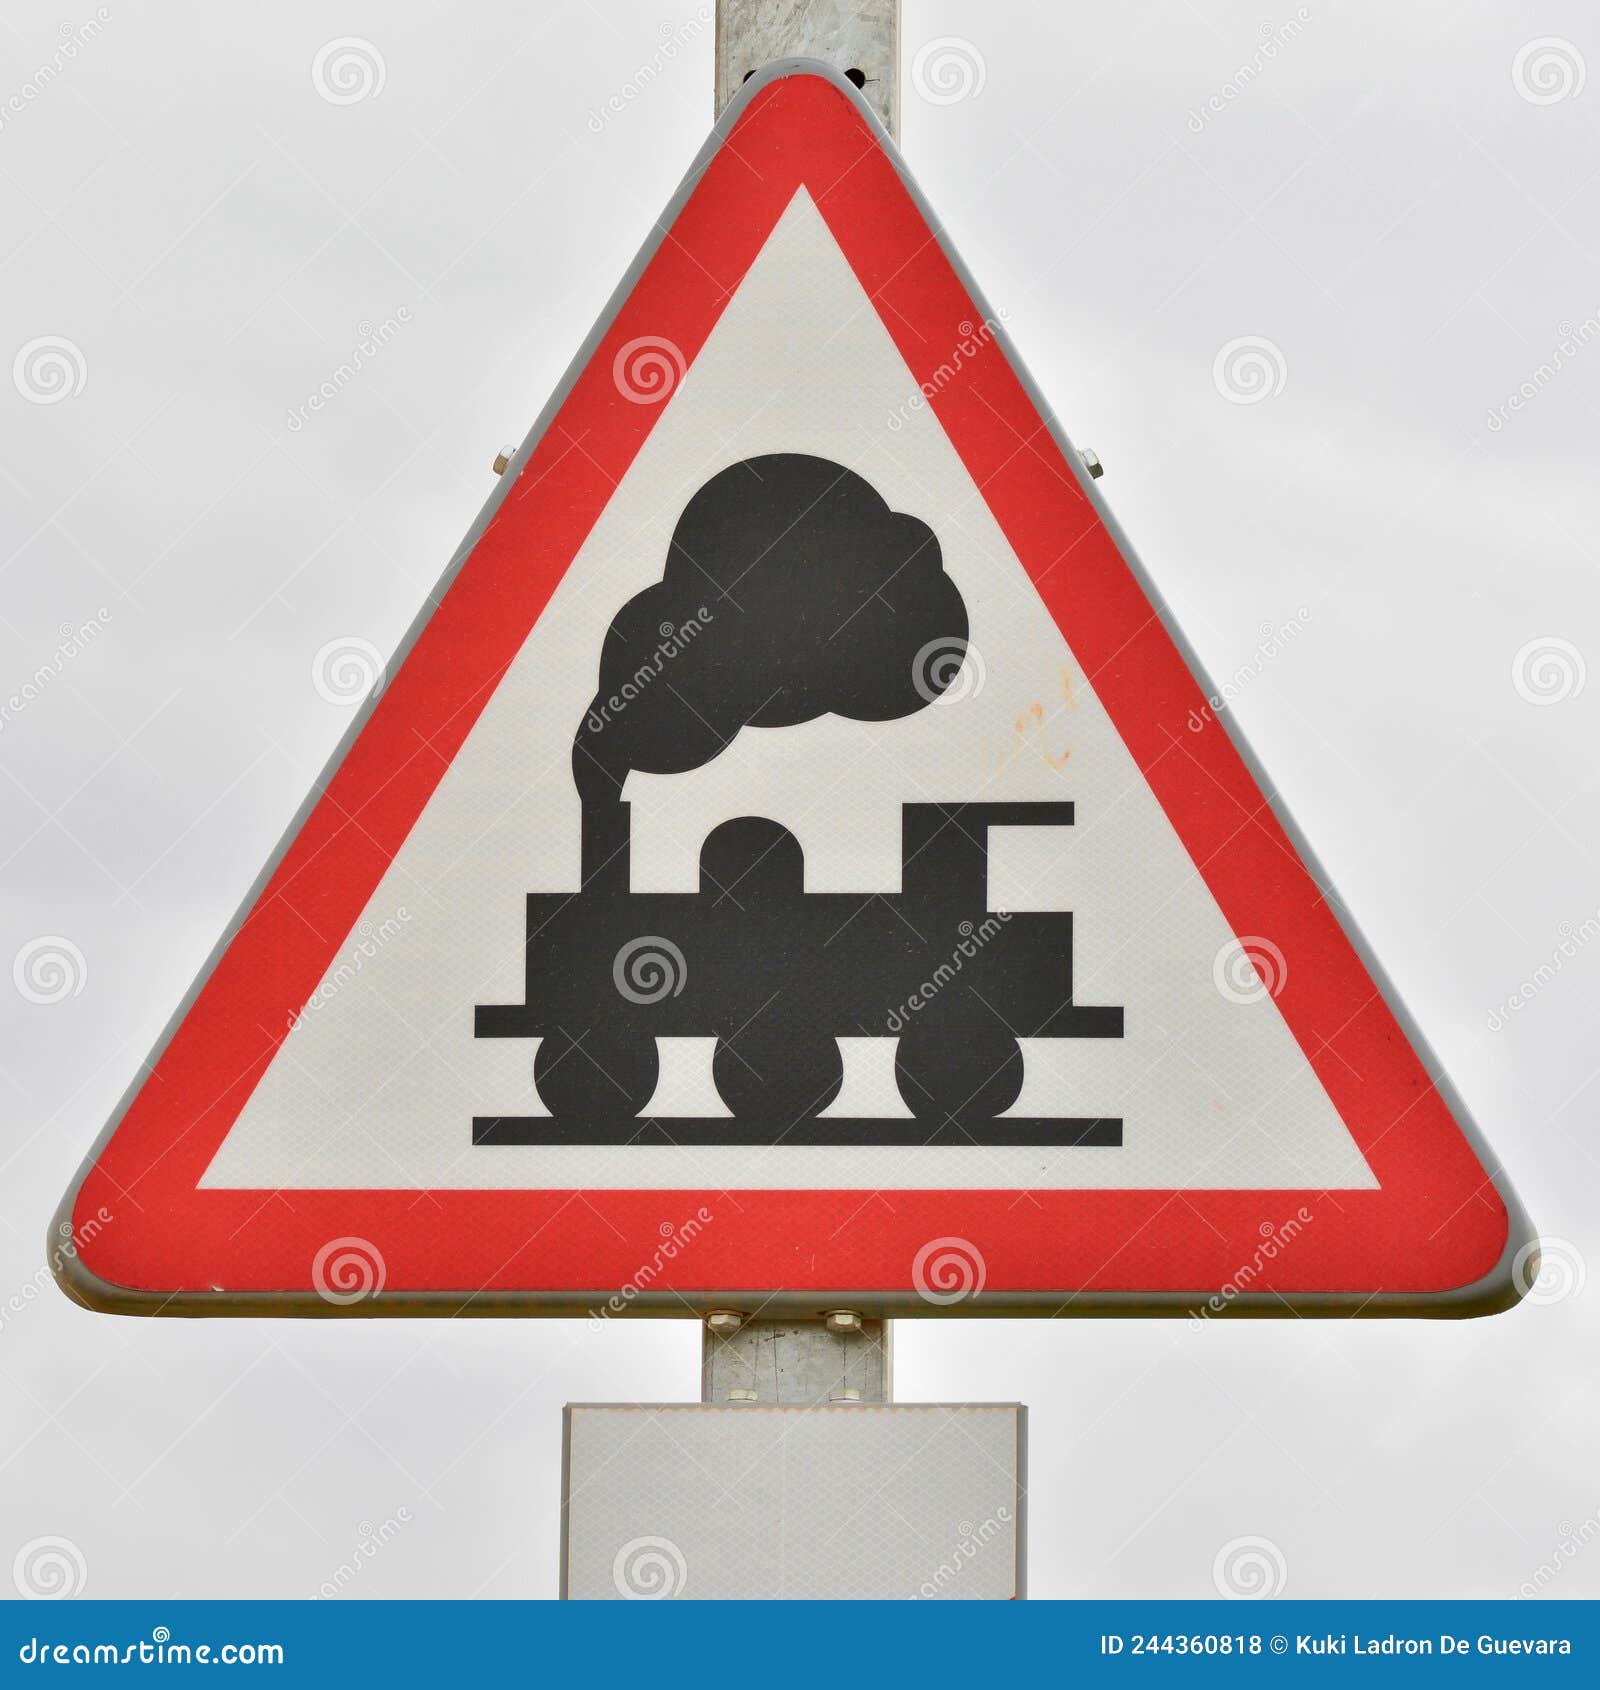 traffic signs of , level crossing